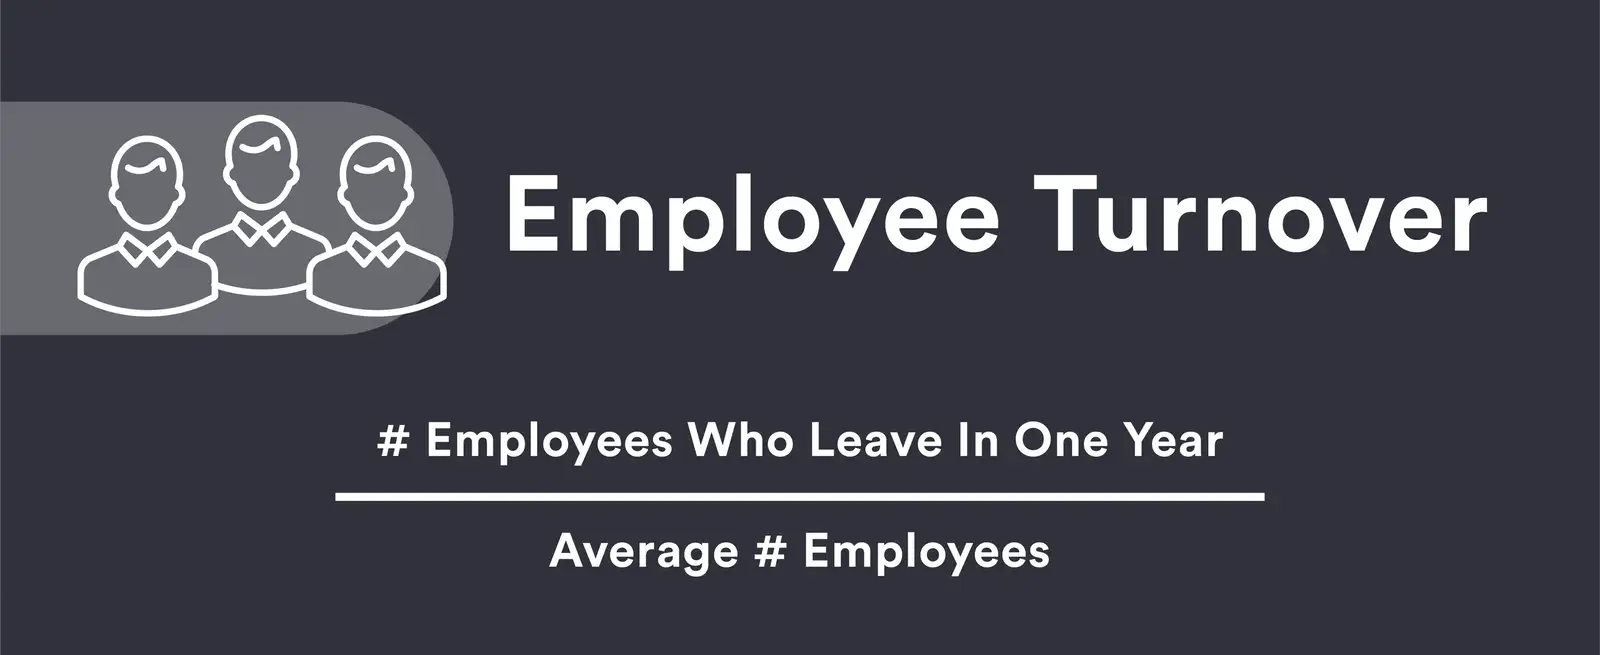 A graphic about Employee turnover rates